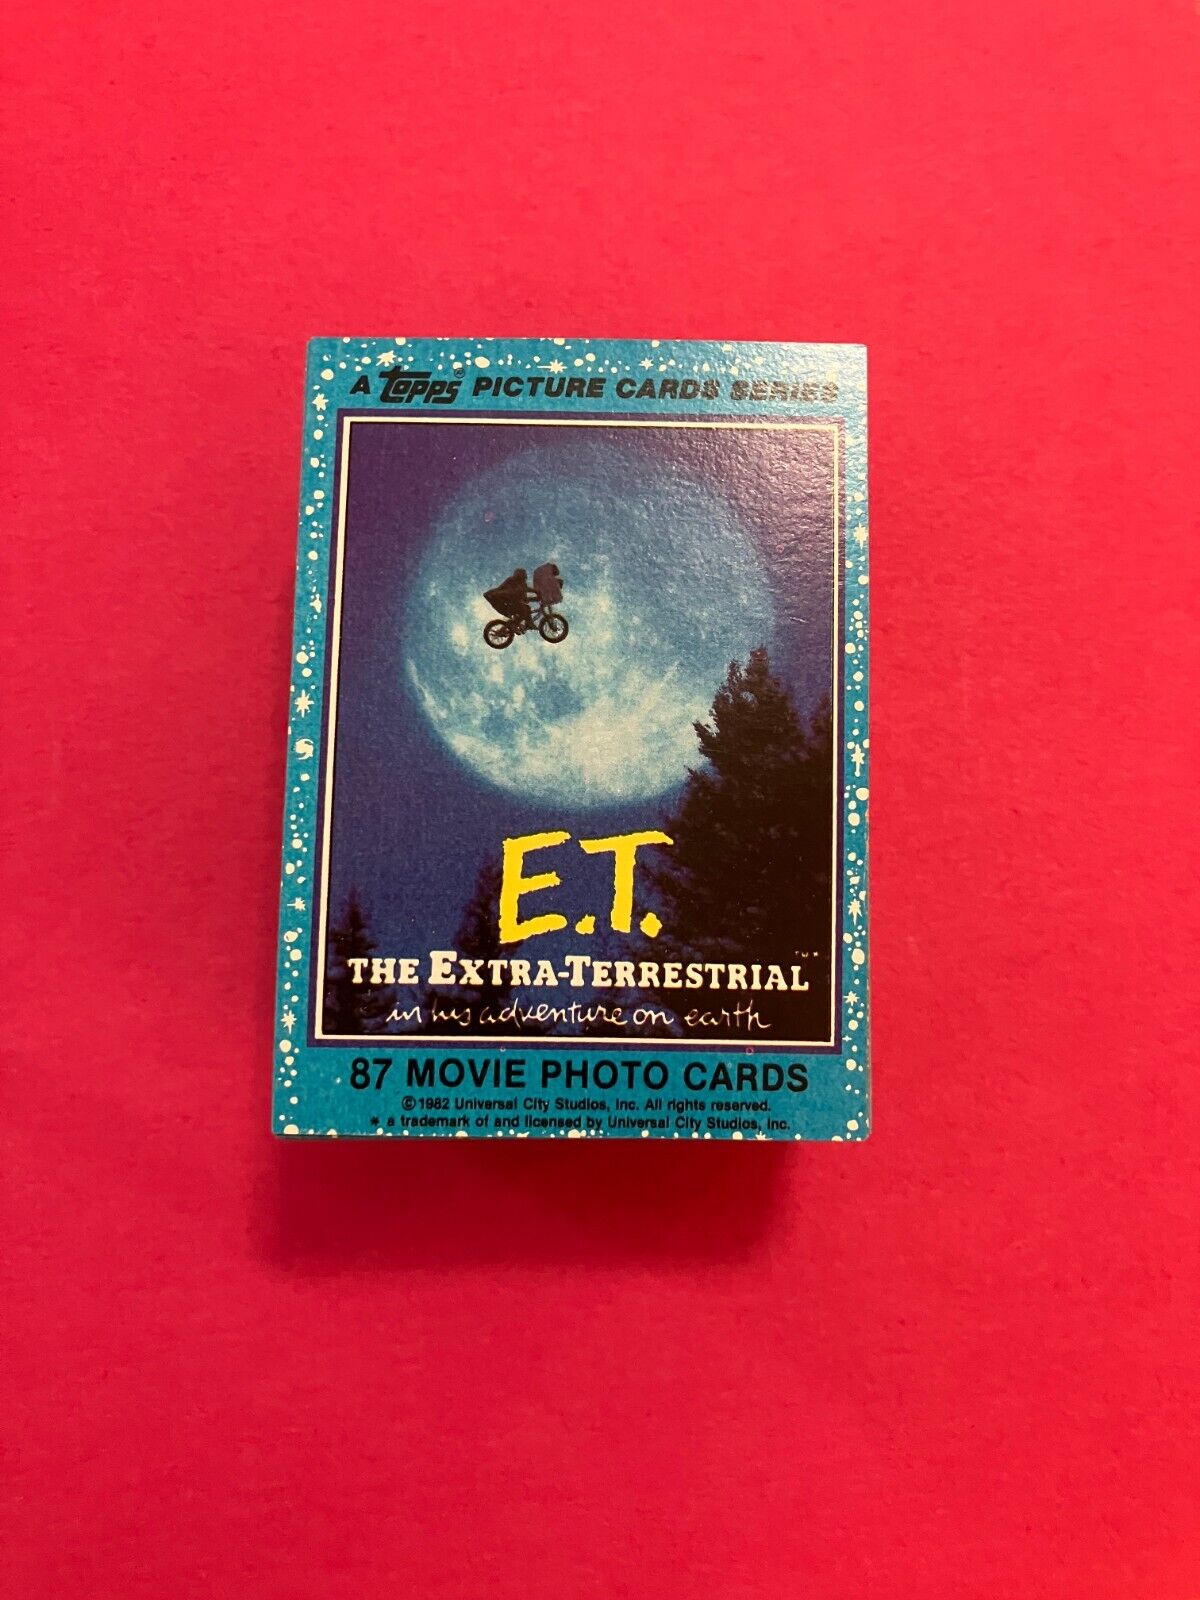 1982 Topps E.T. The Extraterrestrial Lot Set Picture Card Series Vintage Movie